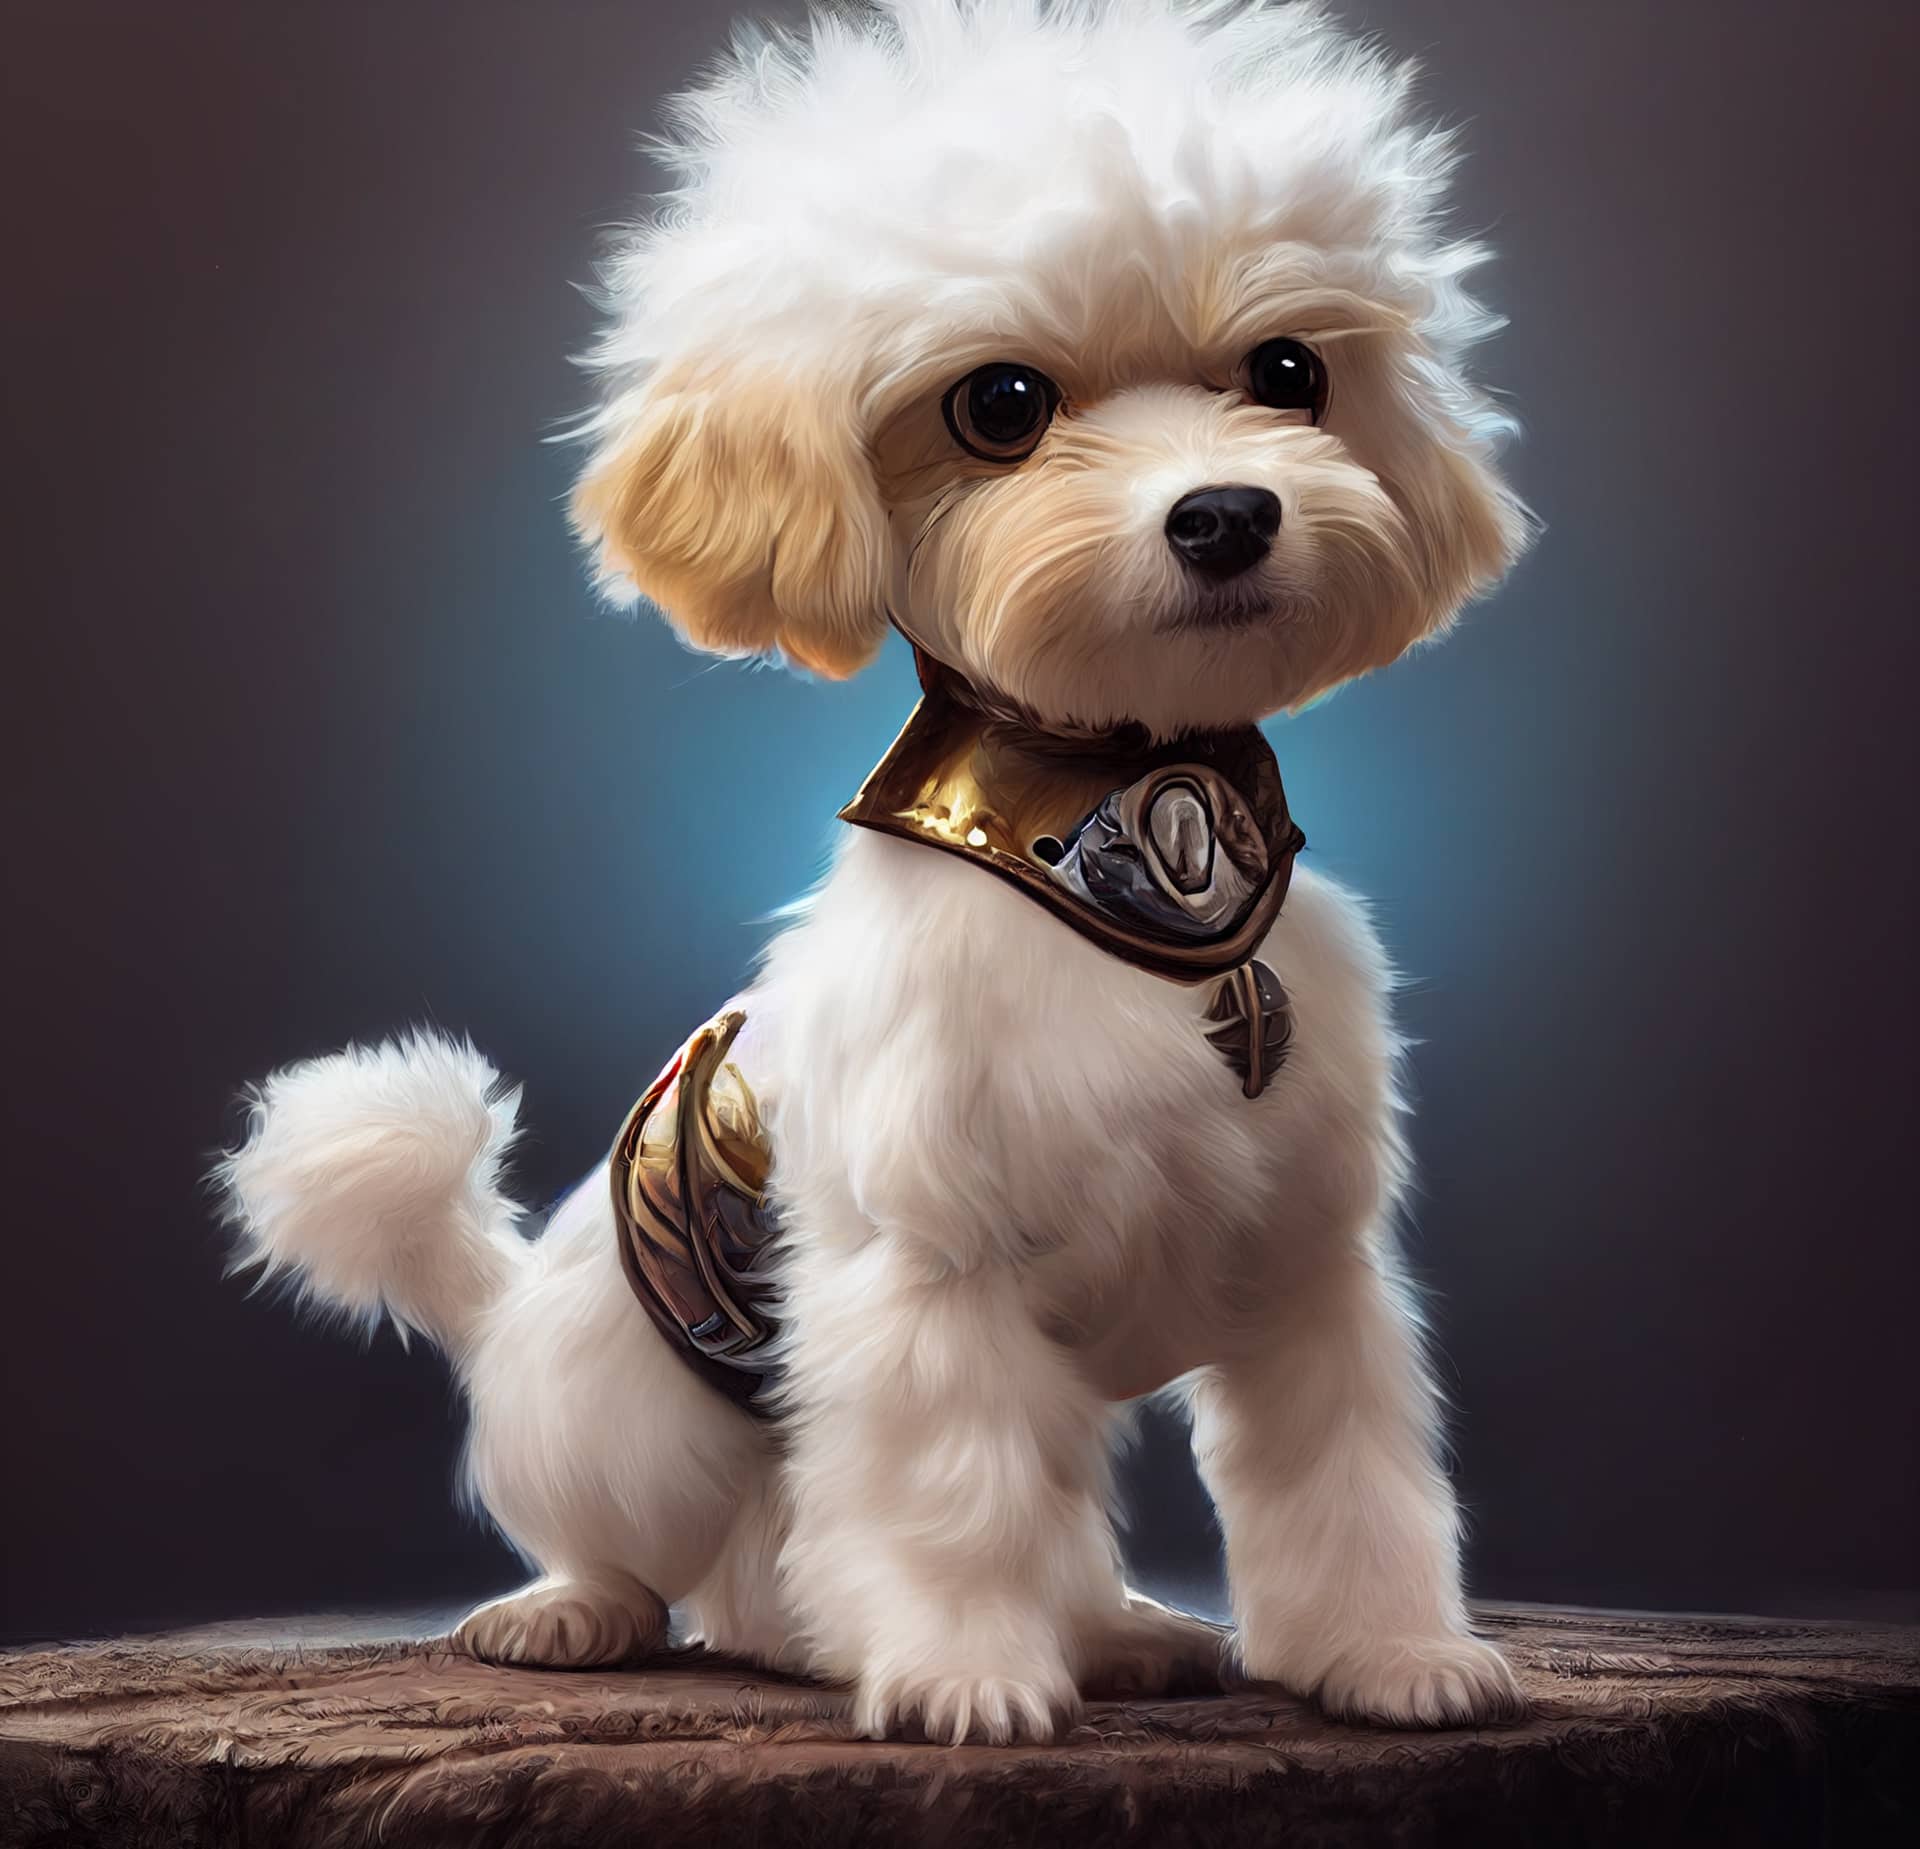 Adorable tiny maltipoo puppy dog animal profile pictures